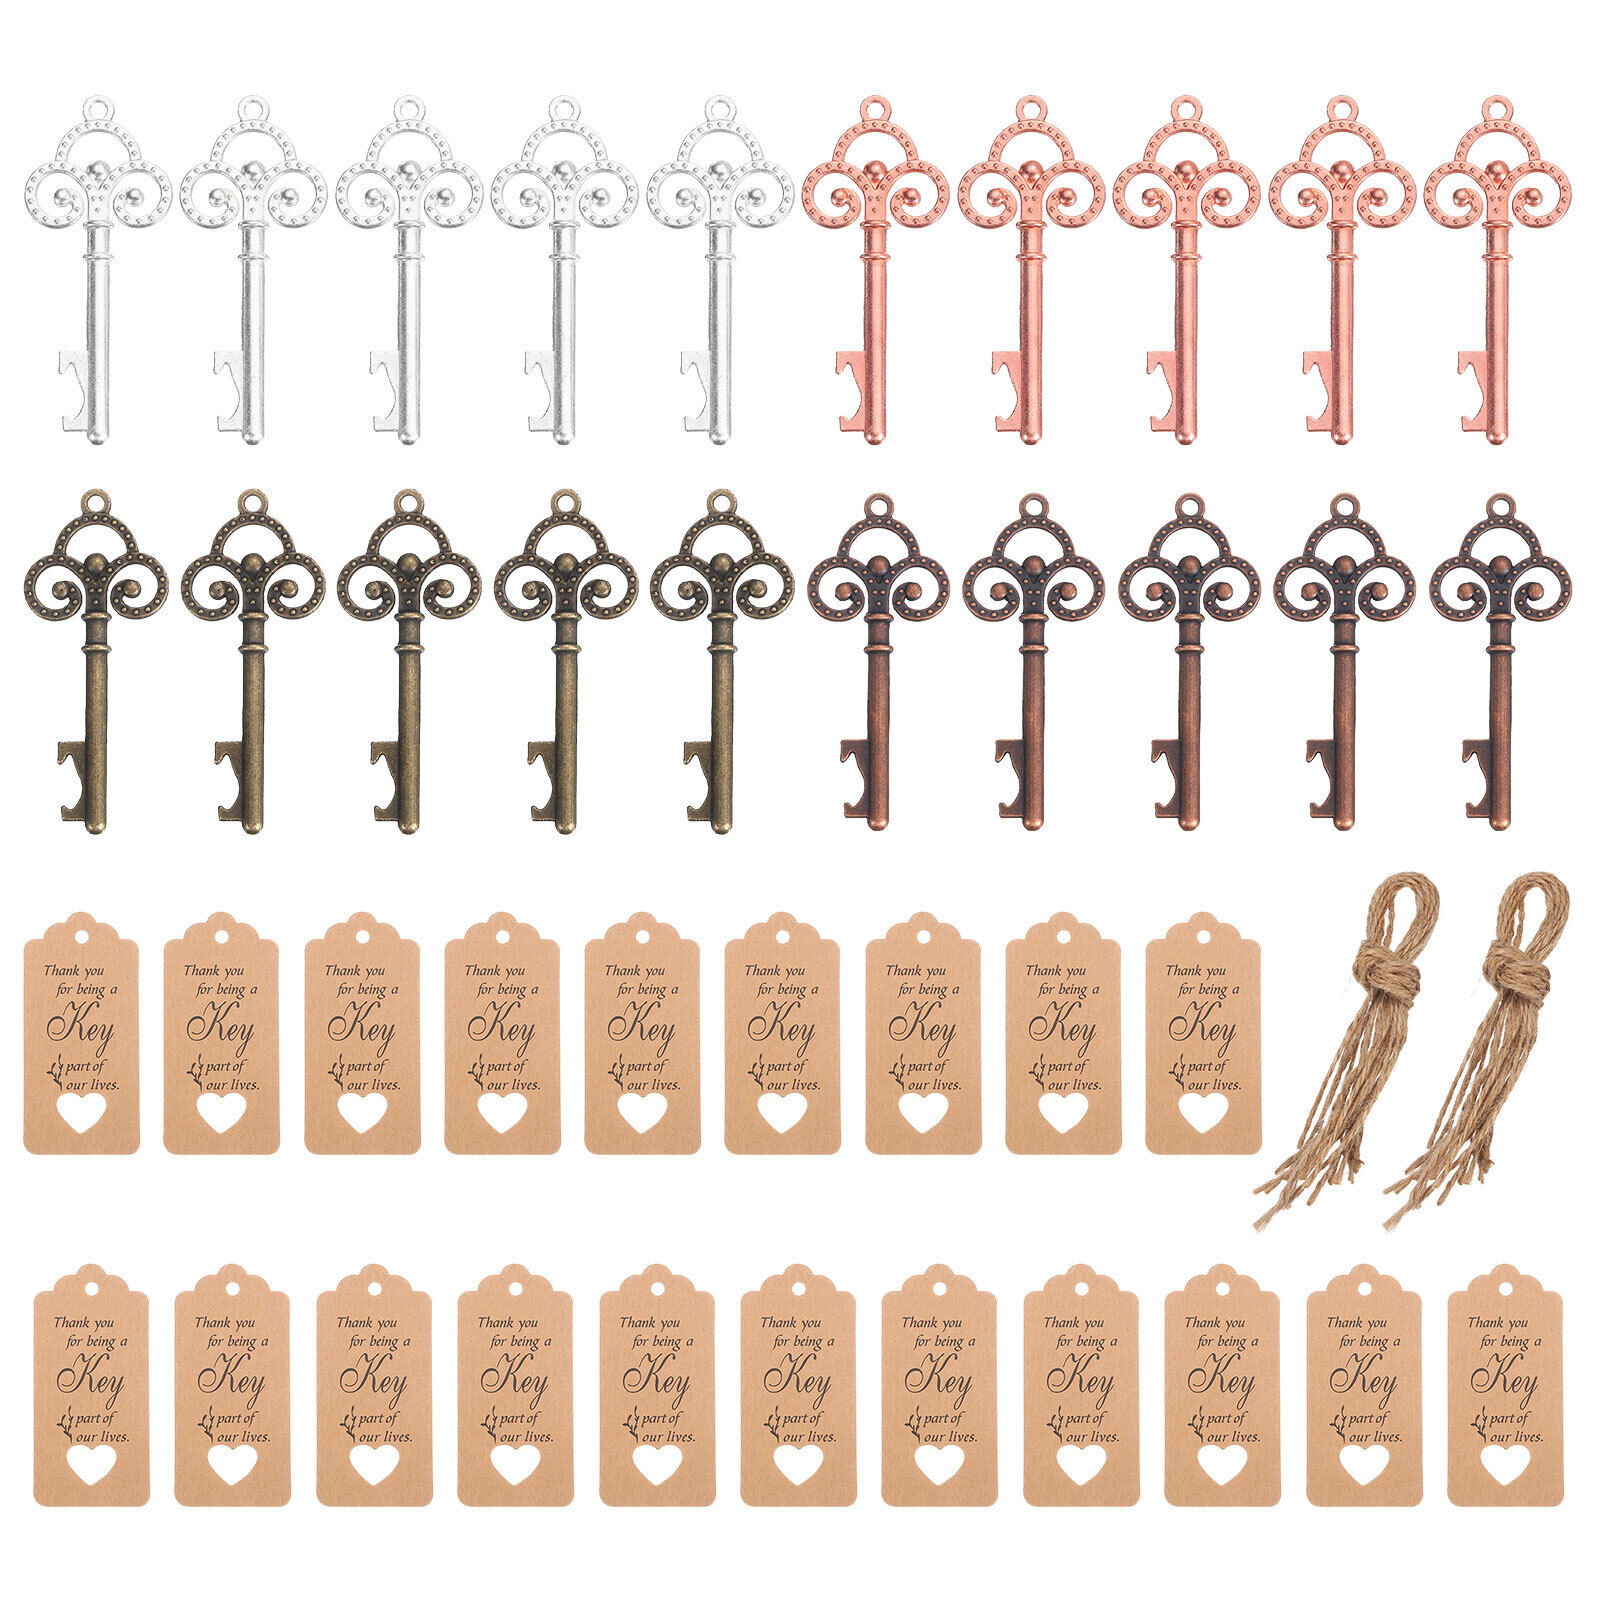 20Pcs Vintage Key Bottle Openers with Card Tag, Organza Bags, Rope, 4Color